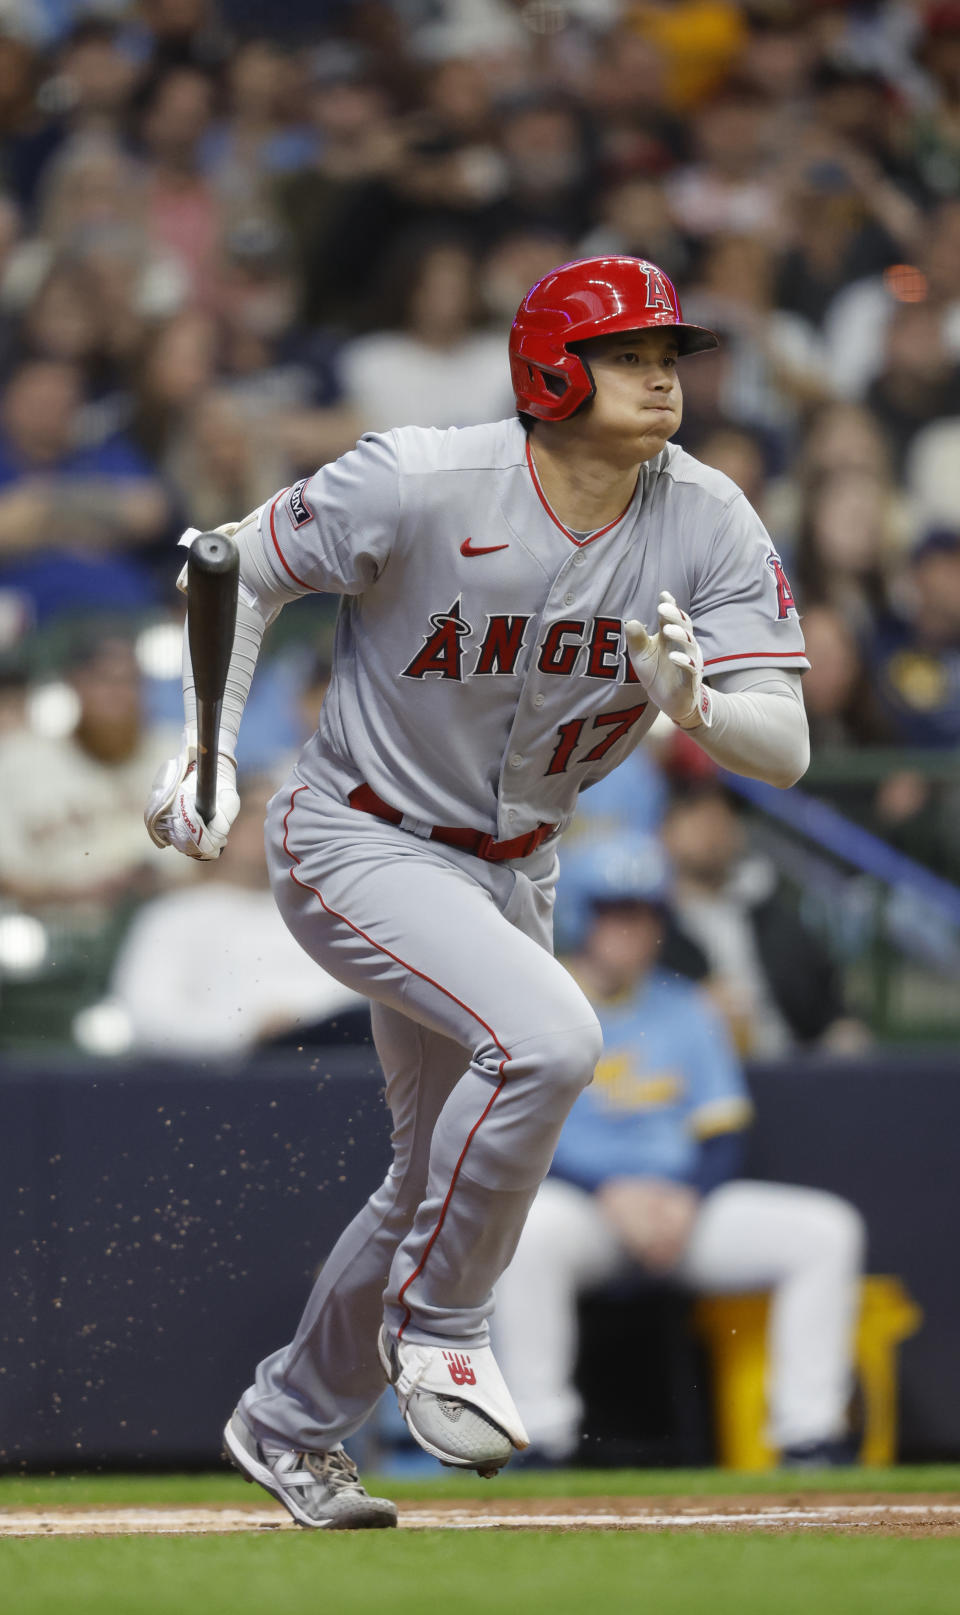 Los Angeles Angels' Shohei Ohtani hits into a fielder's choice against the Milwaukee Brewers during the first inning of a baseball game Friday, April 28, 2023, in Milwaukee. (AP Photo/Jeffrey Phelps)